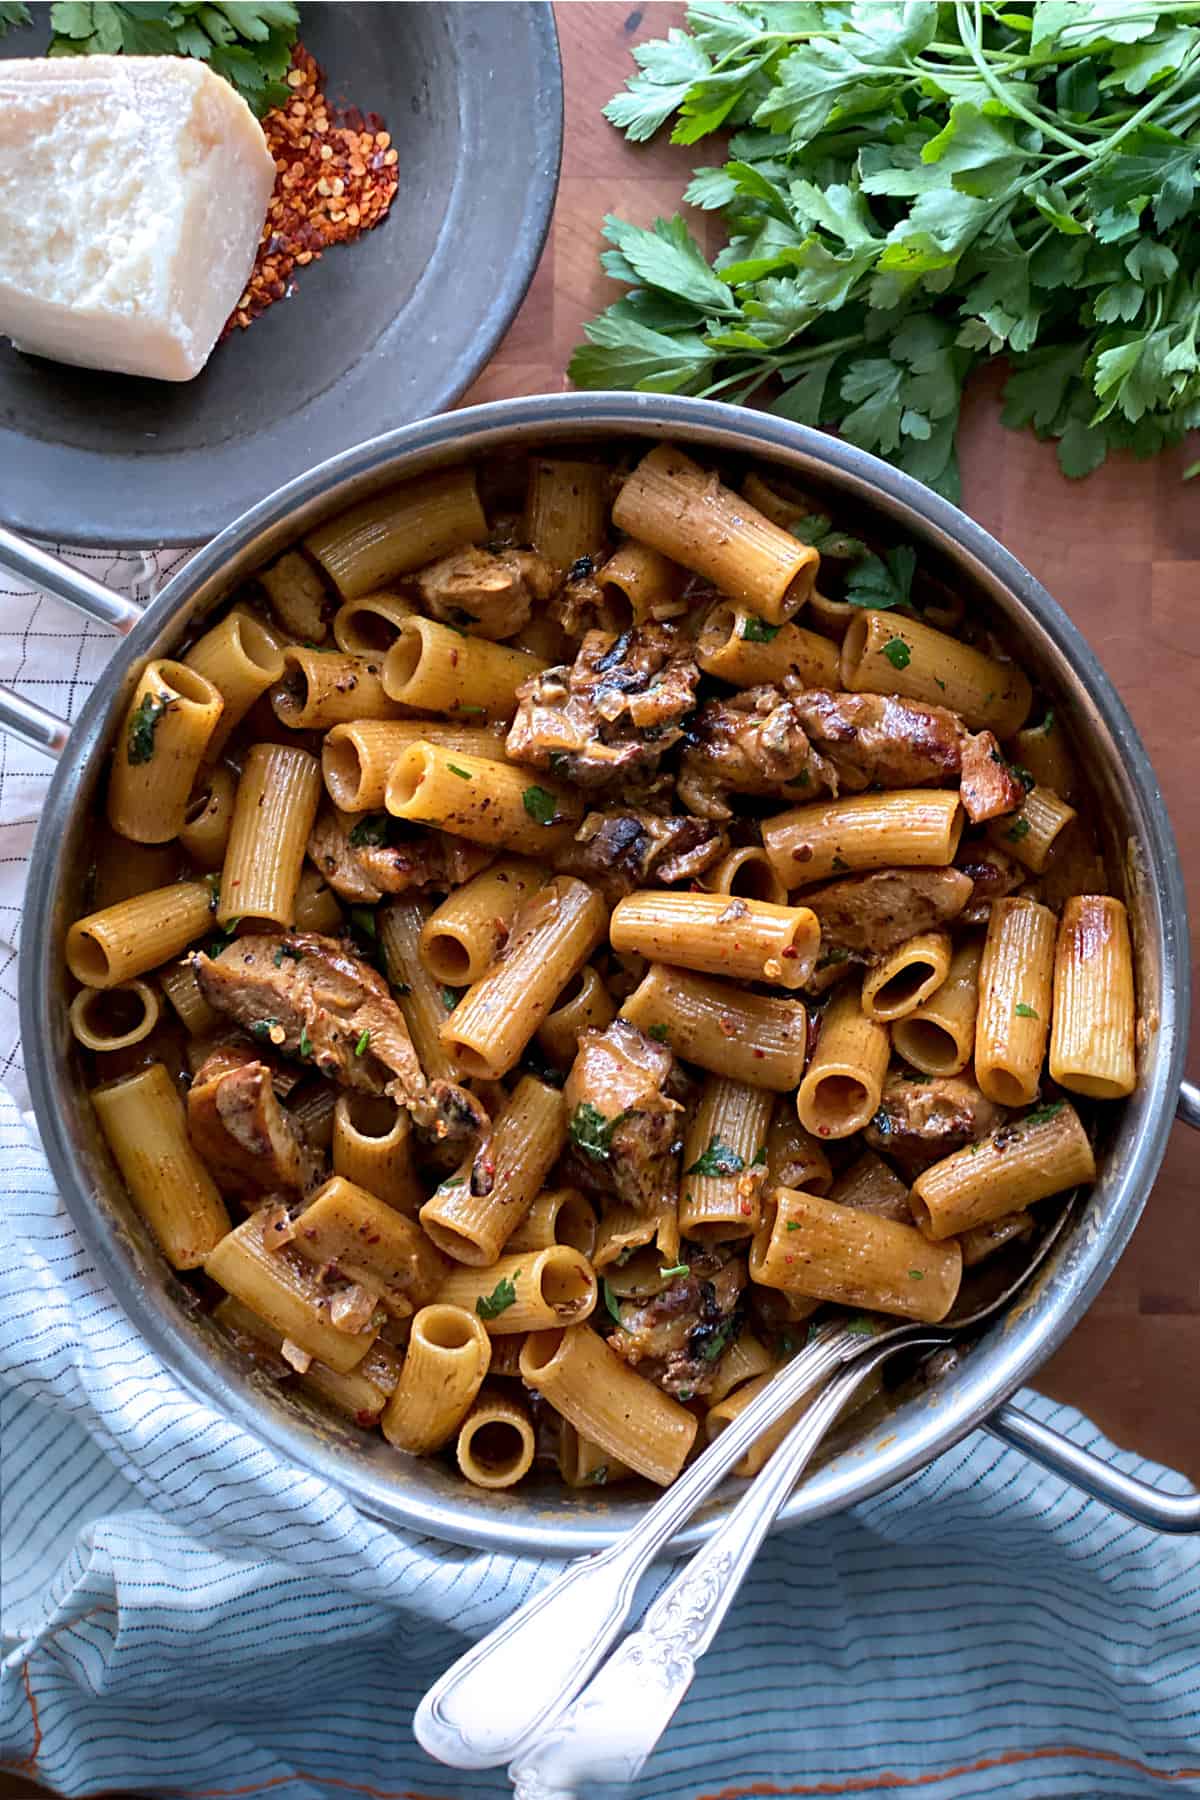 A large deep saucepan with spicy chicken chipotle pasta, two serving utensils. A piece of parmesan cheese and parsley bunch above it. All on a wooden surface.